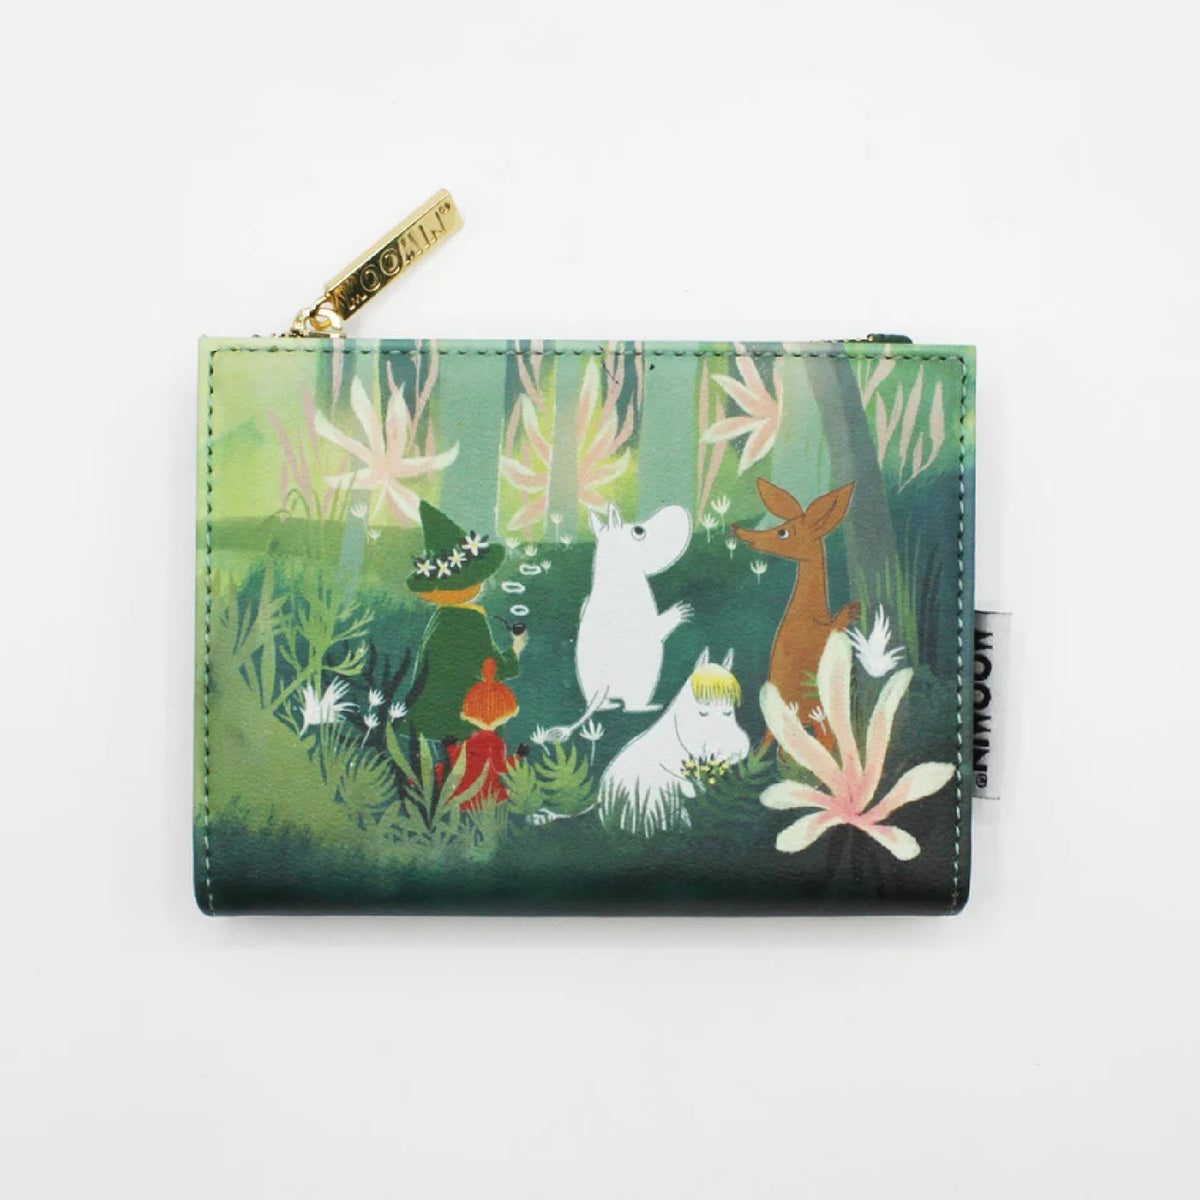 Purse Enchanted Forest